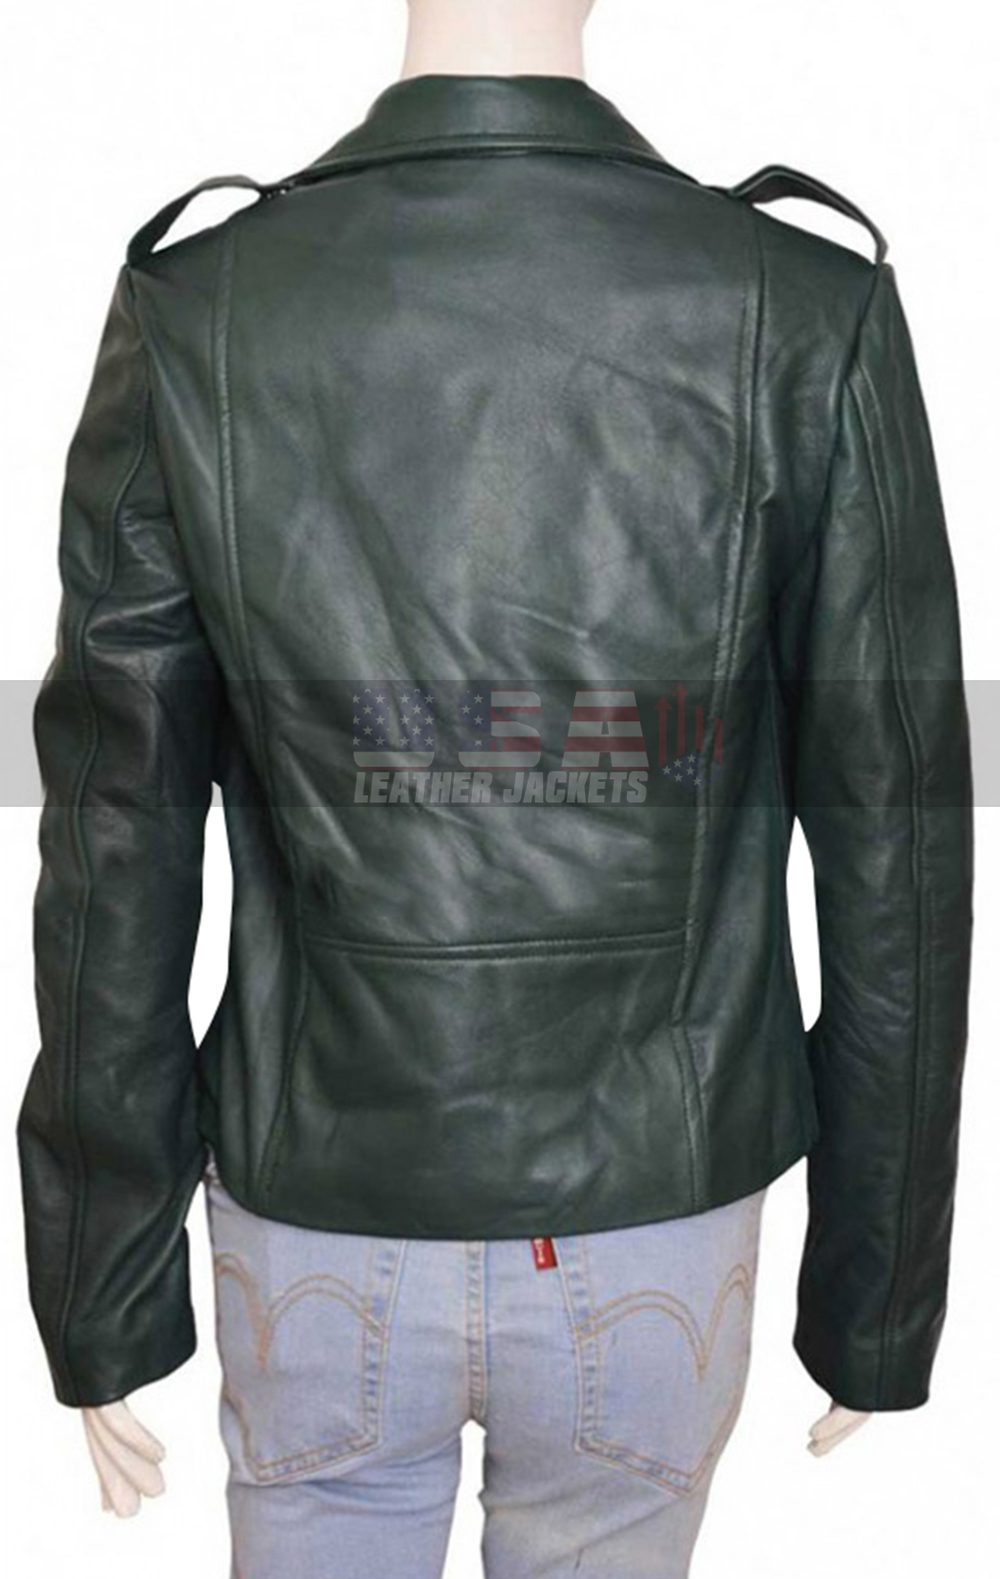 Preacher Tulip O'Hare Motorcycle Green Leather Jacket